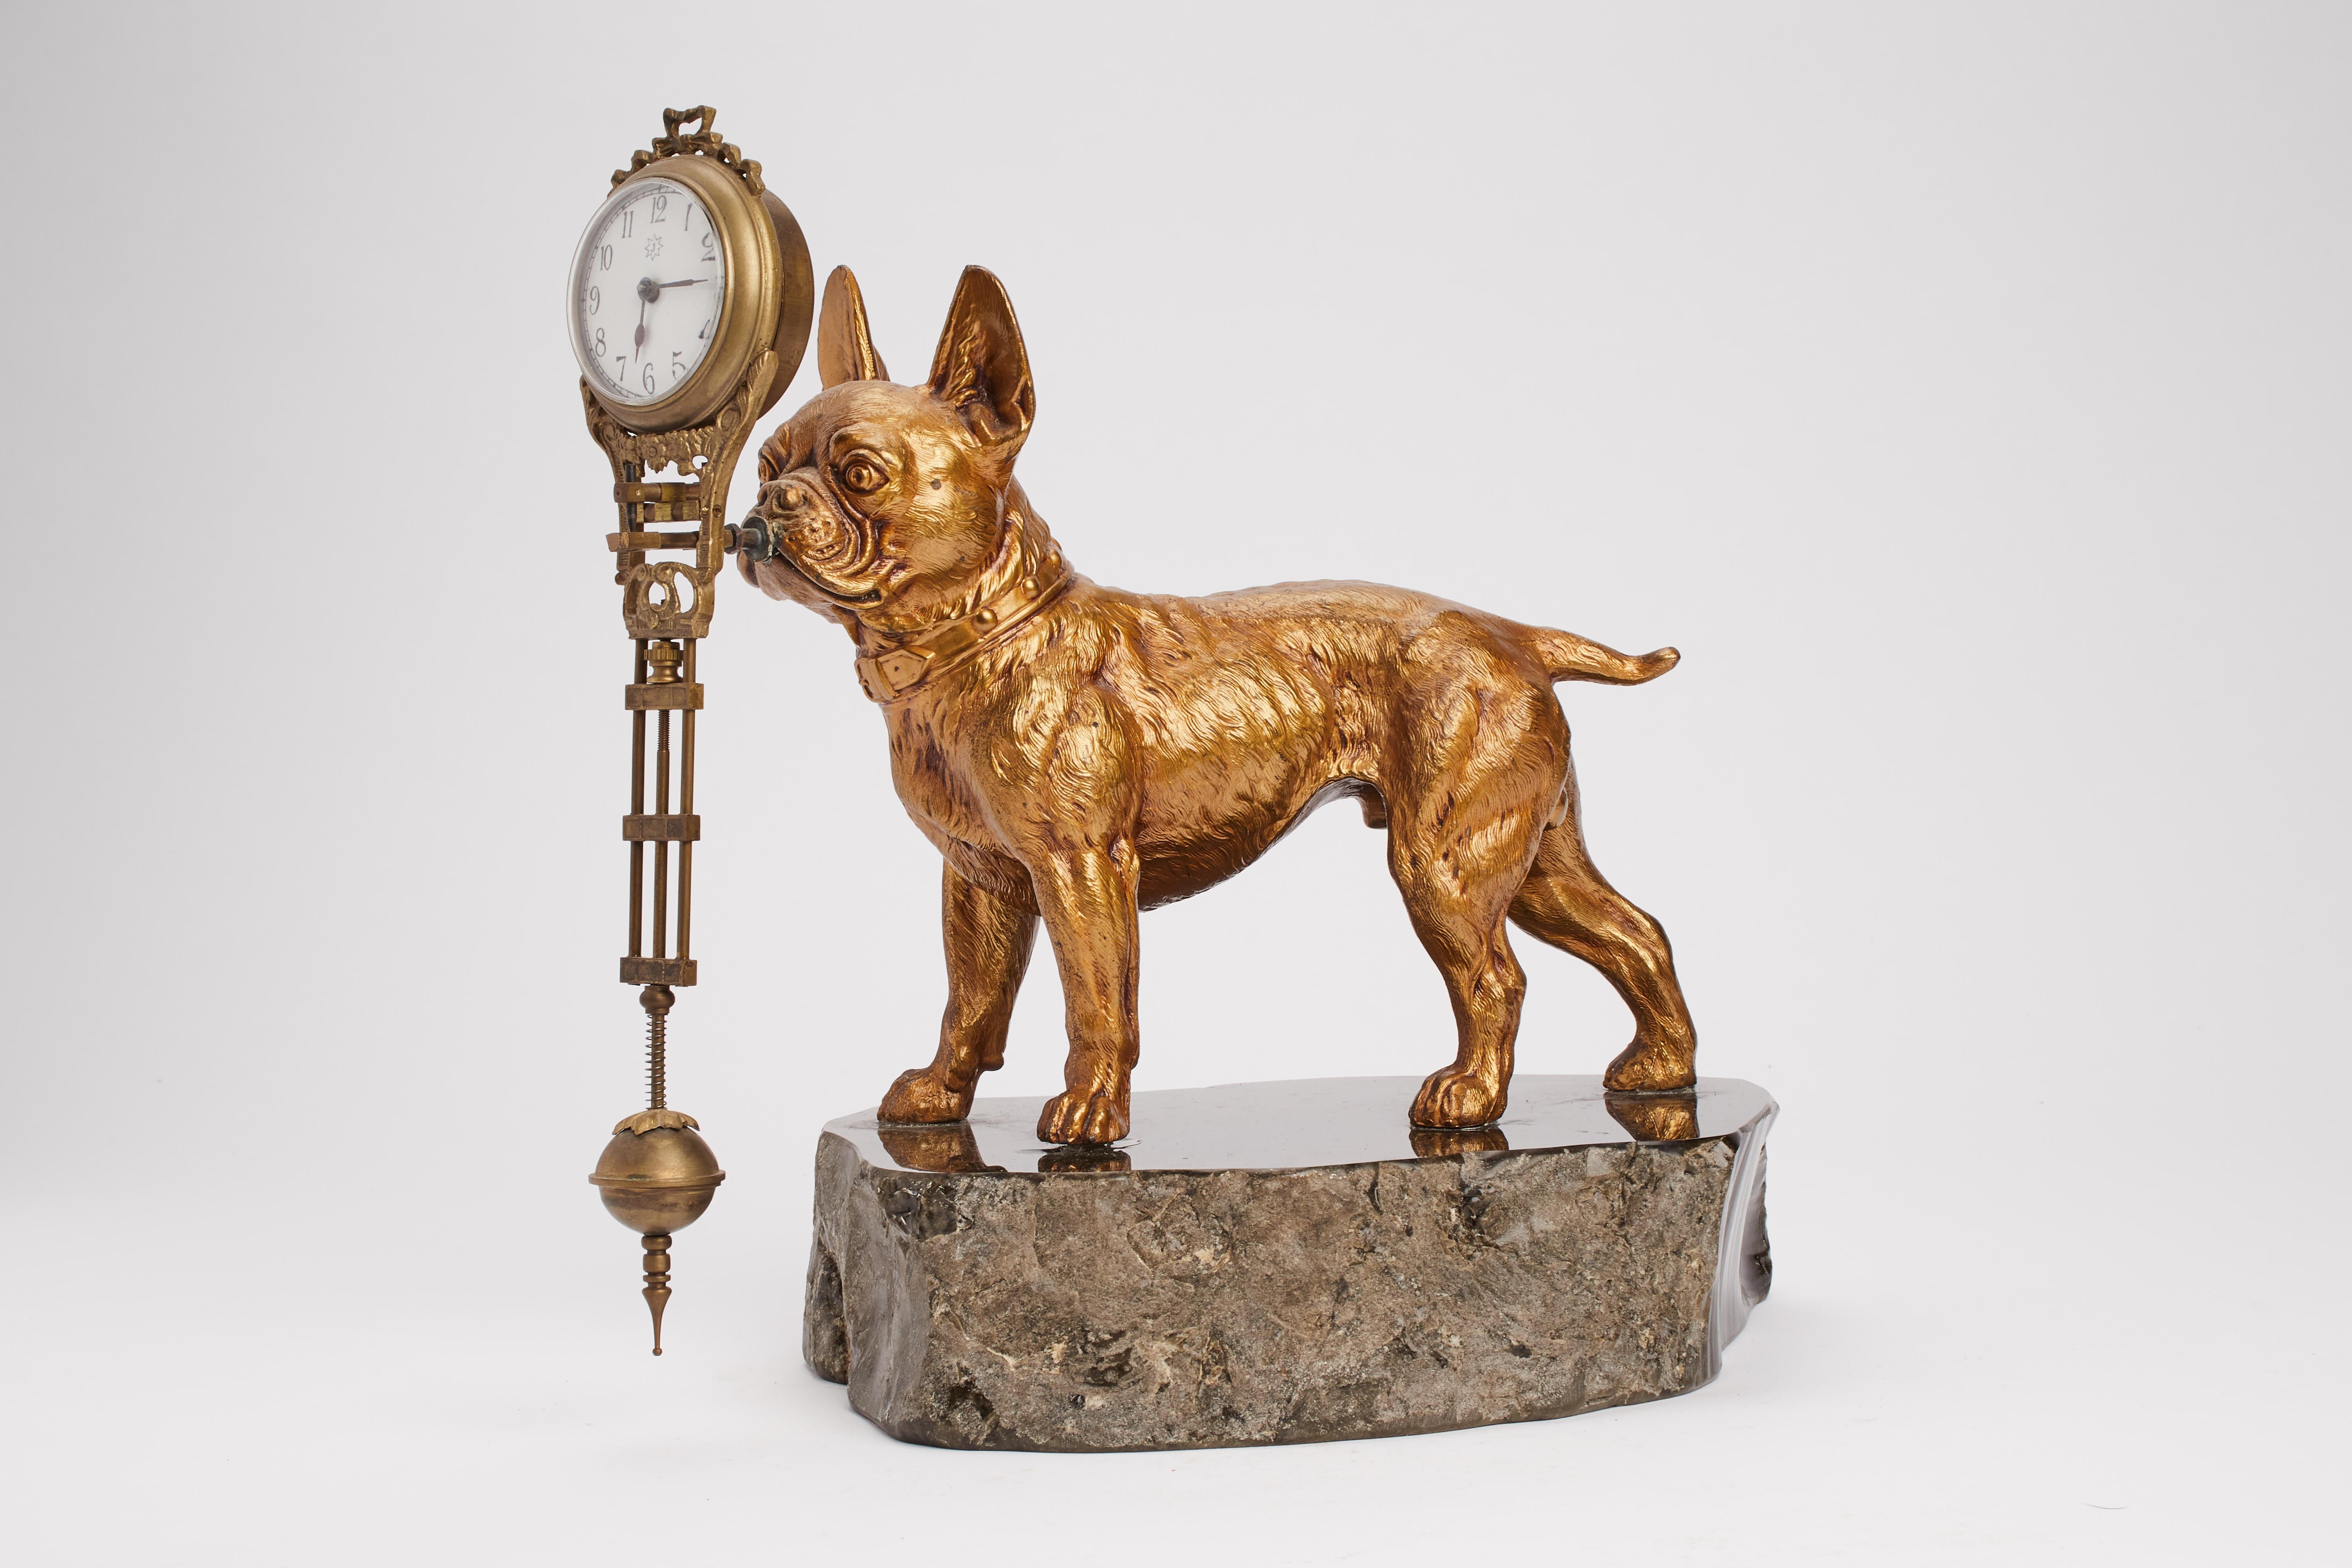 Over a green marble base, with a moved profile of bronze gilded depicting a French bulldog holding in his mouth a pendulum clock, which entirely oscillates, the top part with all the clock, and in opposite the lower part with the sphere-shaped